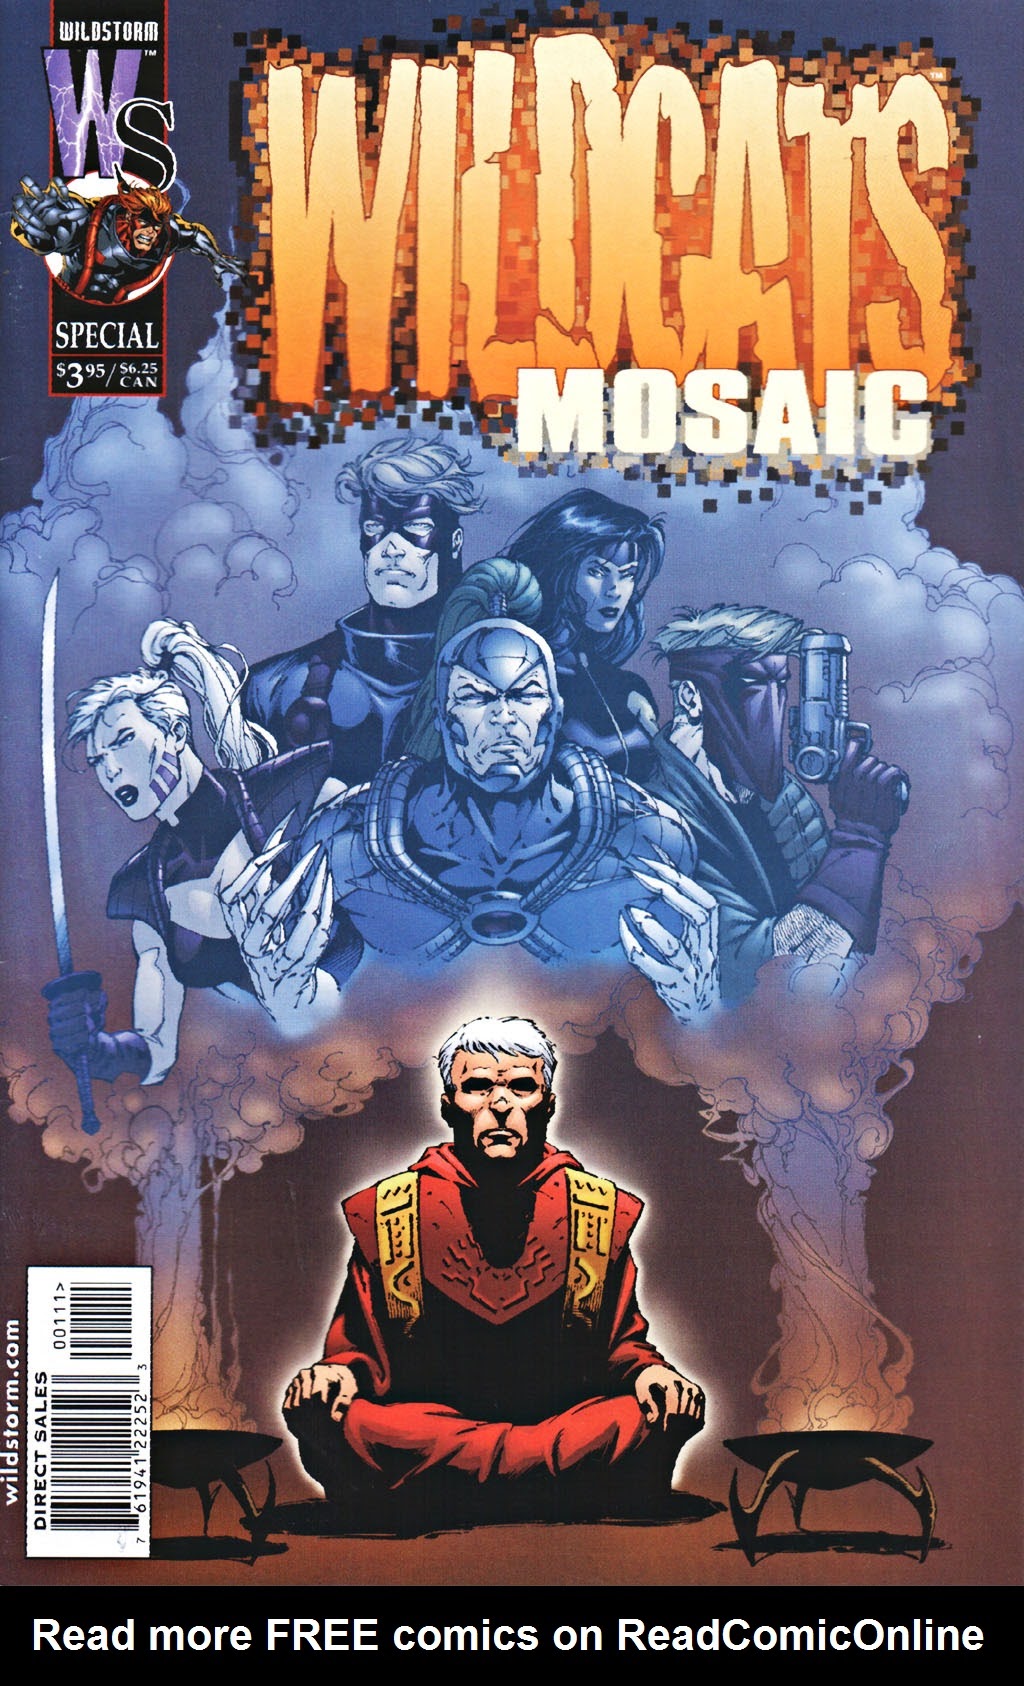 Read online WildCats: Mosaic comic -  Issue # Full - 1